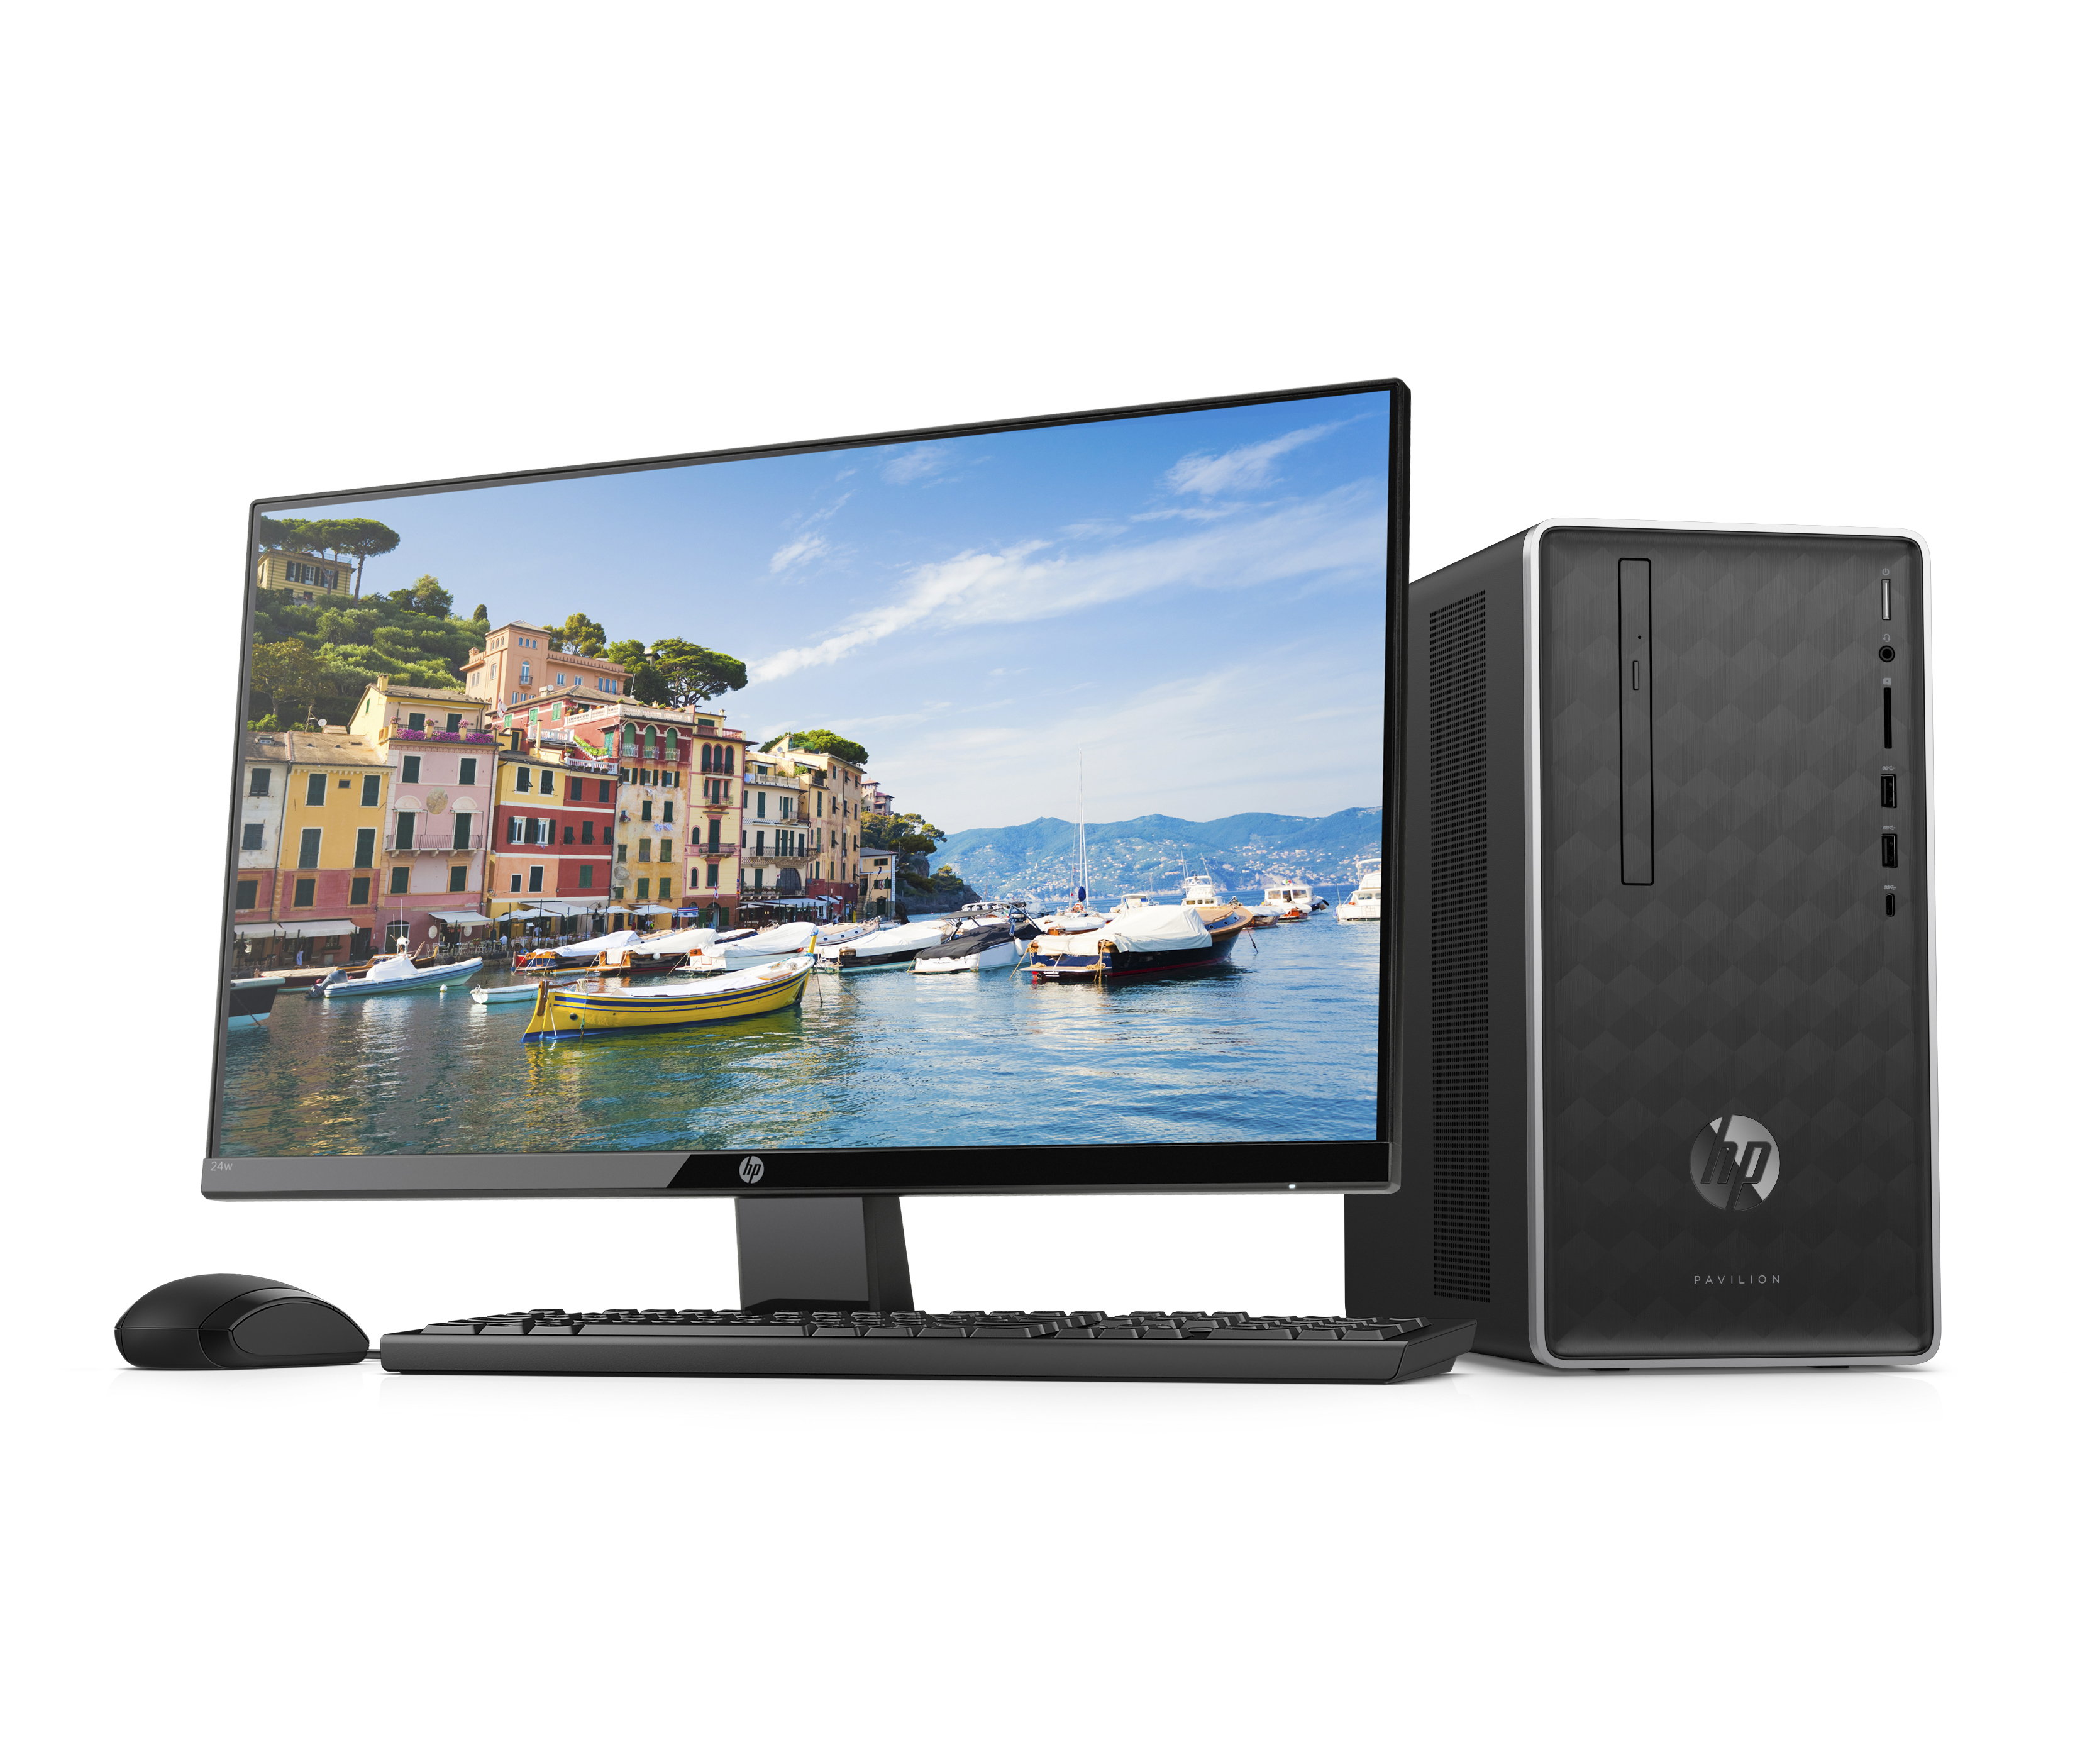 HP Desktop and Pavilion Monitor Bundle, 23.8" Full HD Monitor, HP Pavilion Tower: Intel Core i3-8100, 4GB SDRAM, 1TB HDD + 16GB Intel Optane memory, DVD, Mouse and Keyboard, Ash Silver - image 1 of 6